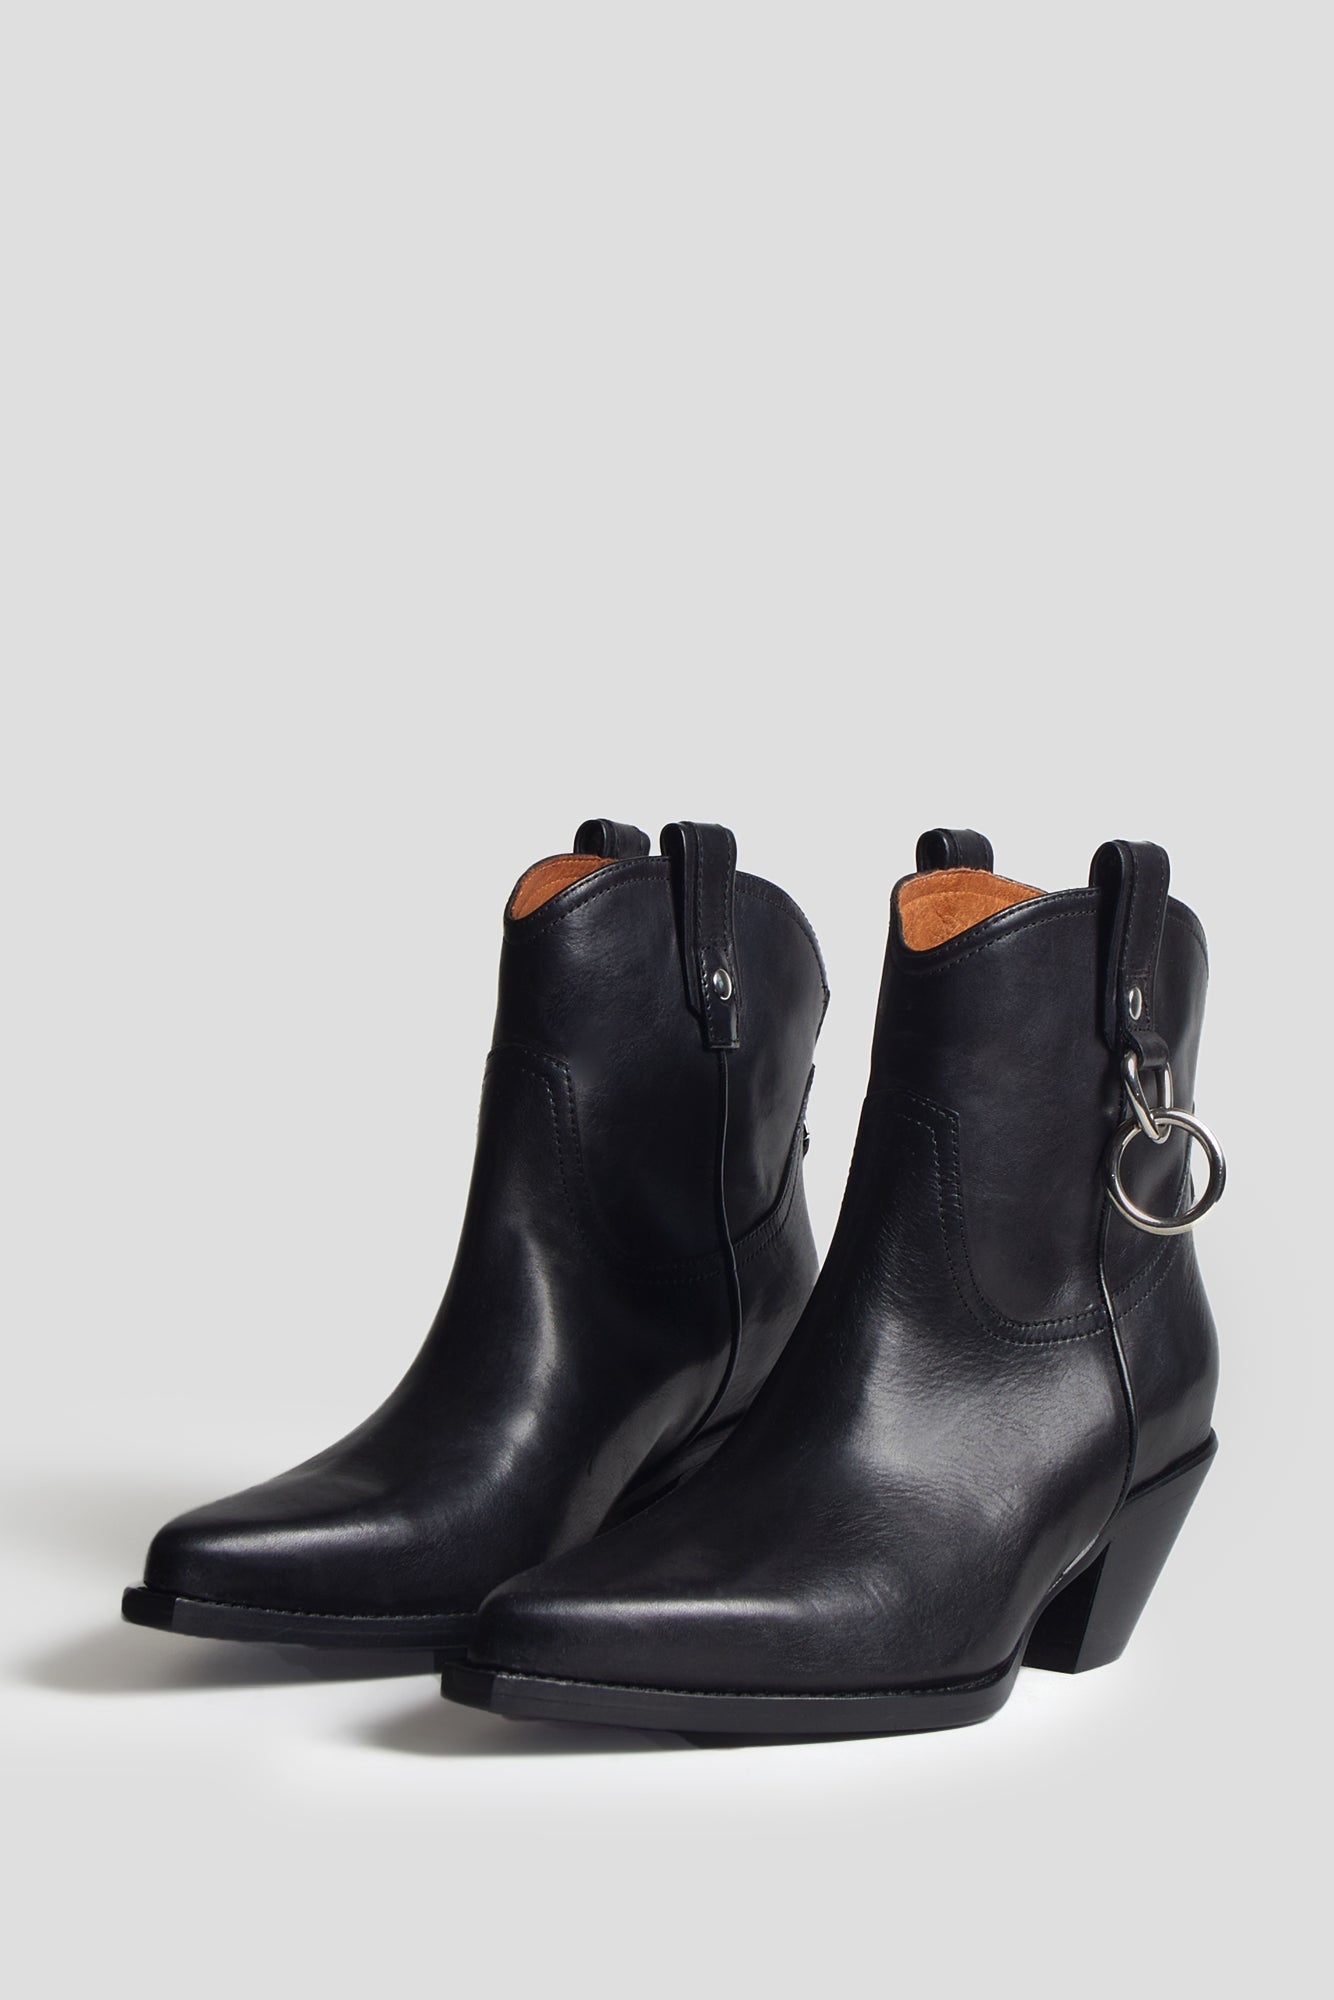 RINGED ANKLE COWBOY BOOT - BLACK - 1